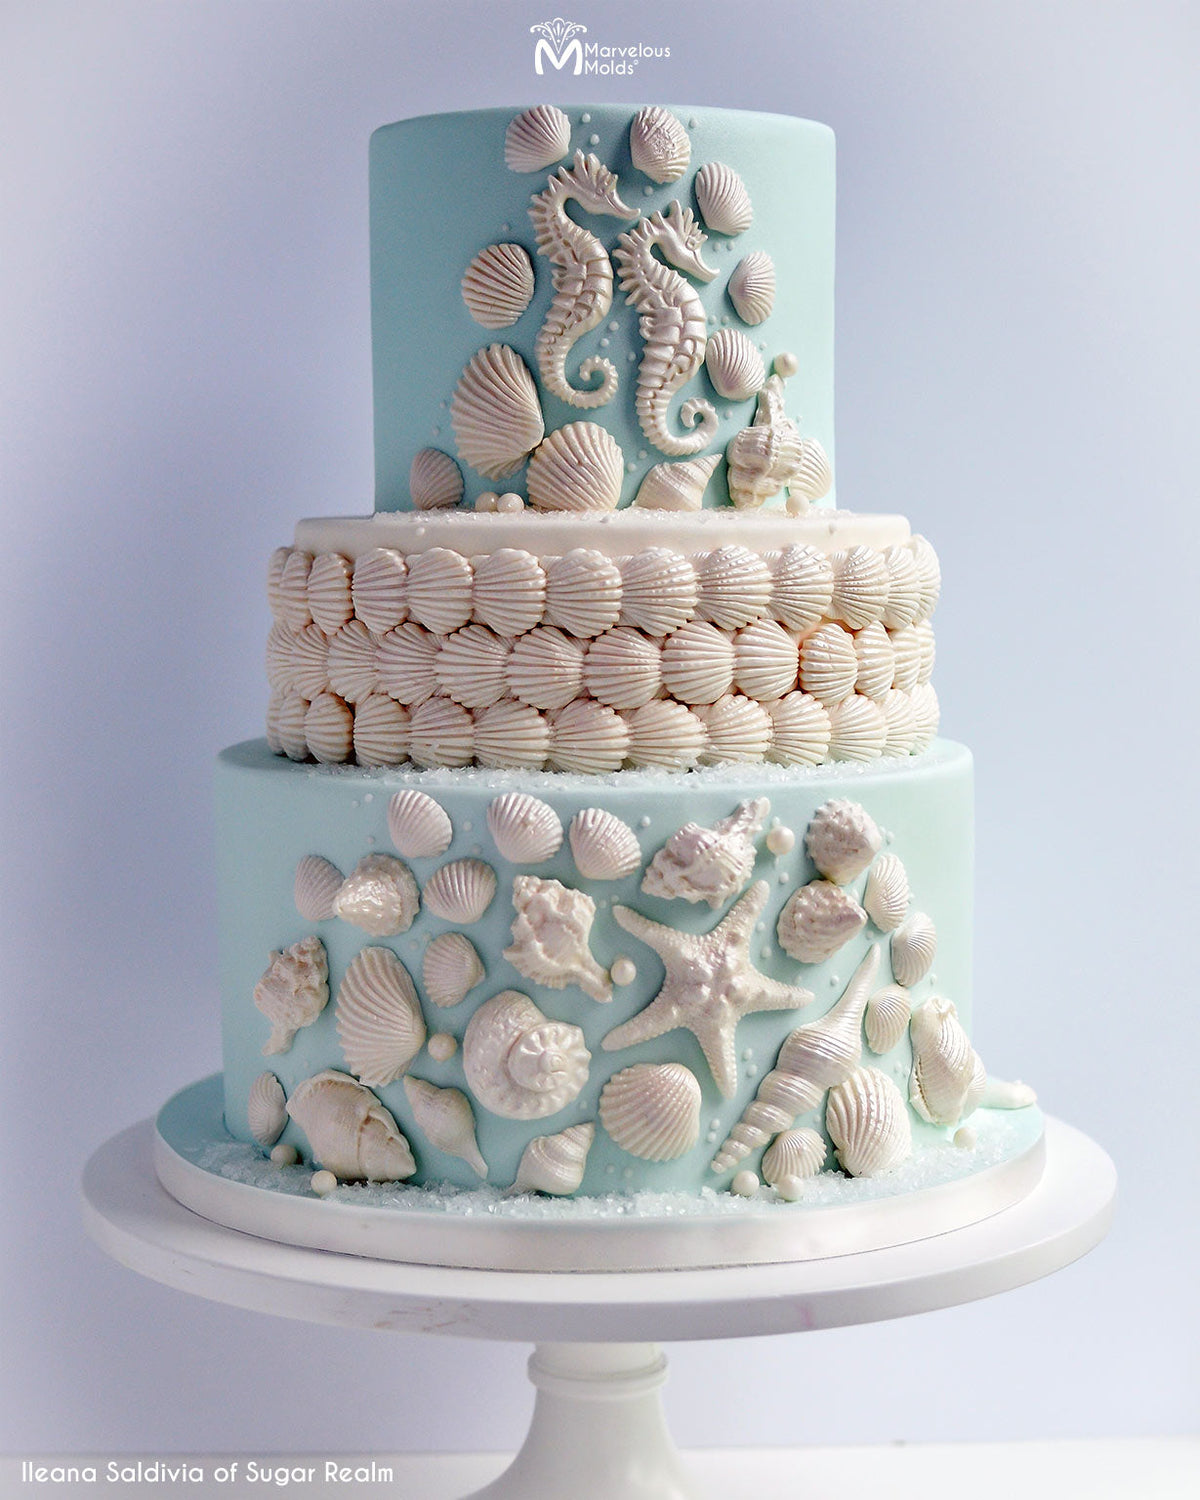 Seashell Ocean Themed Seafoam Colored Wedding Cake Decorated Using the Marvelous Molds Beaded Periwinkle Shell Silicone Mold